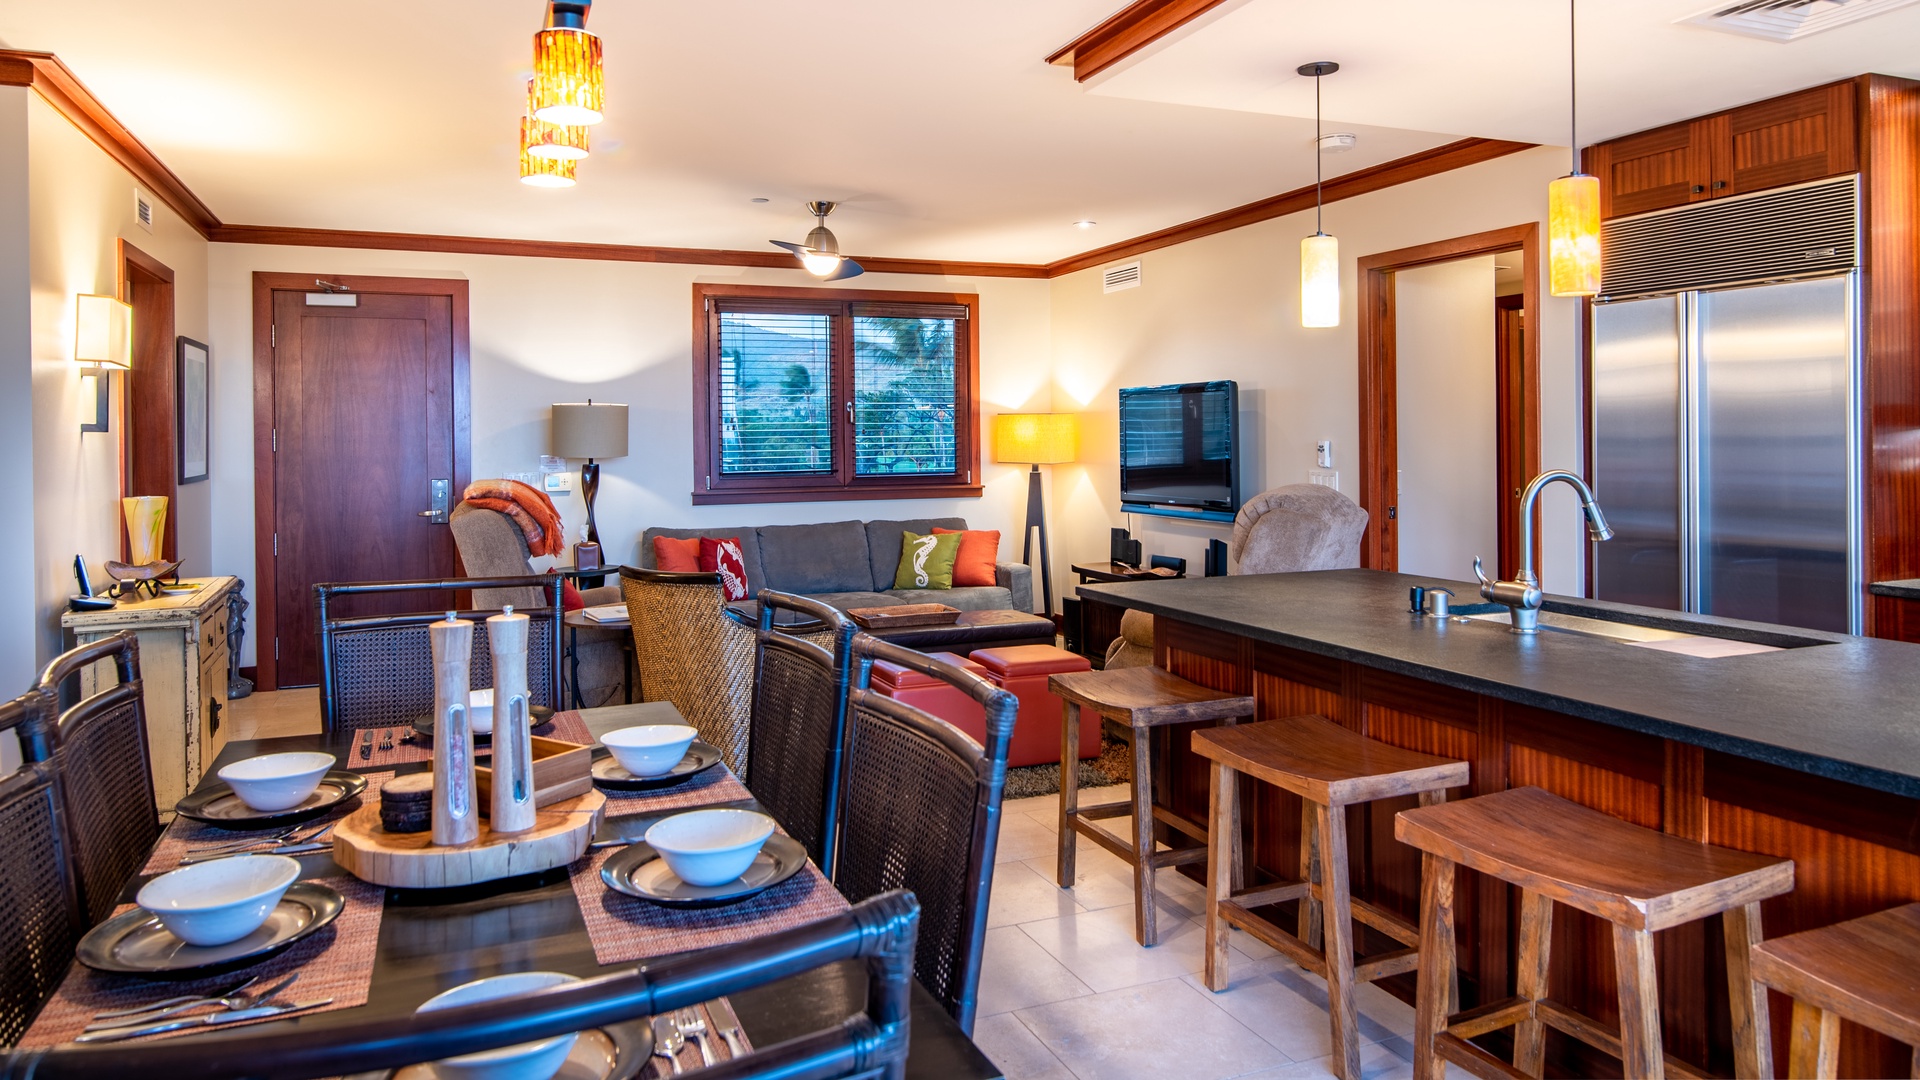 Kapolei Vacation Rentals, Ko Olina Beach Villas B301 - A Roy Yamaguci designed kitchen with stainless steel appliances and a cozy living room area.